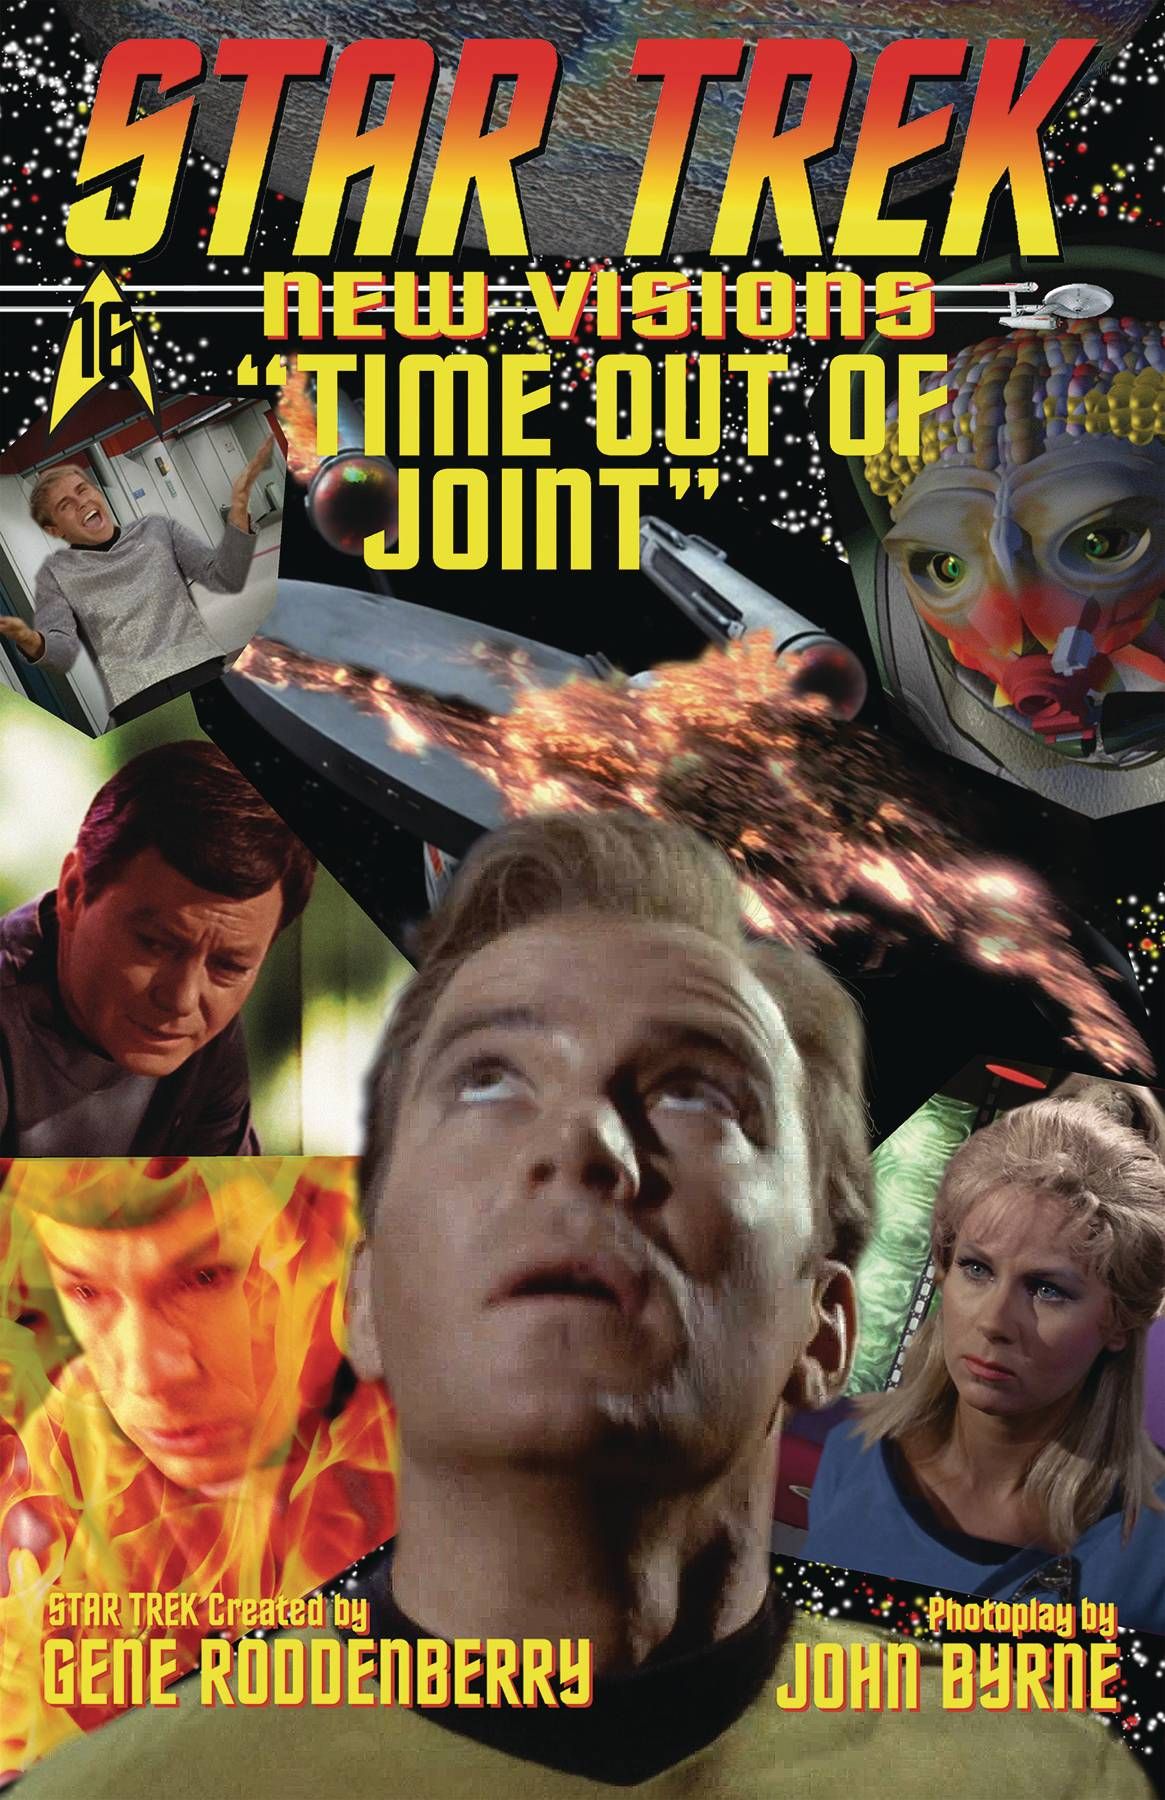 Star Trek: New Visions #16 (Time Out Of Joint) Comic